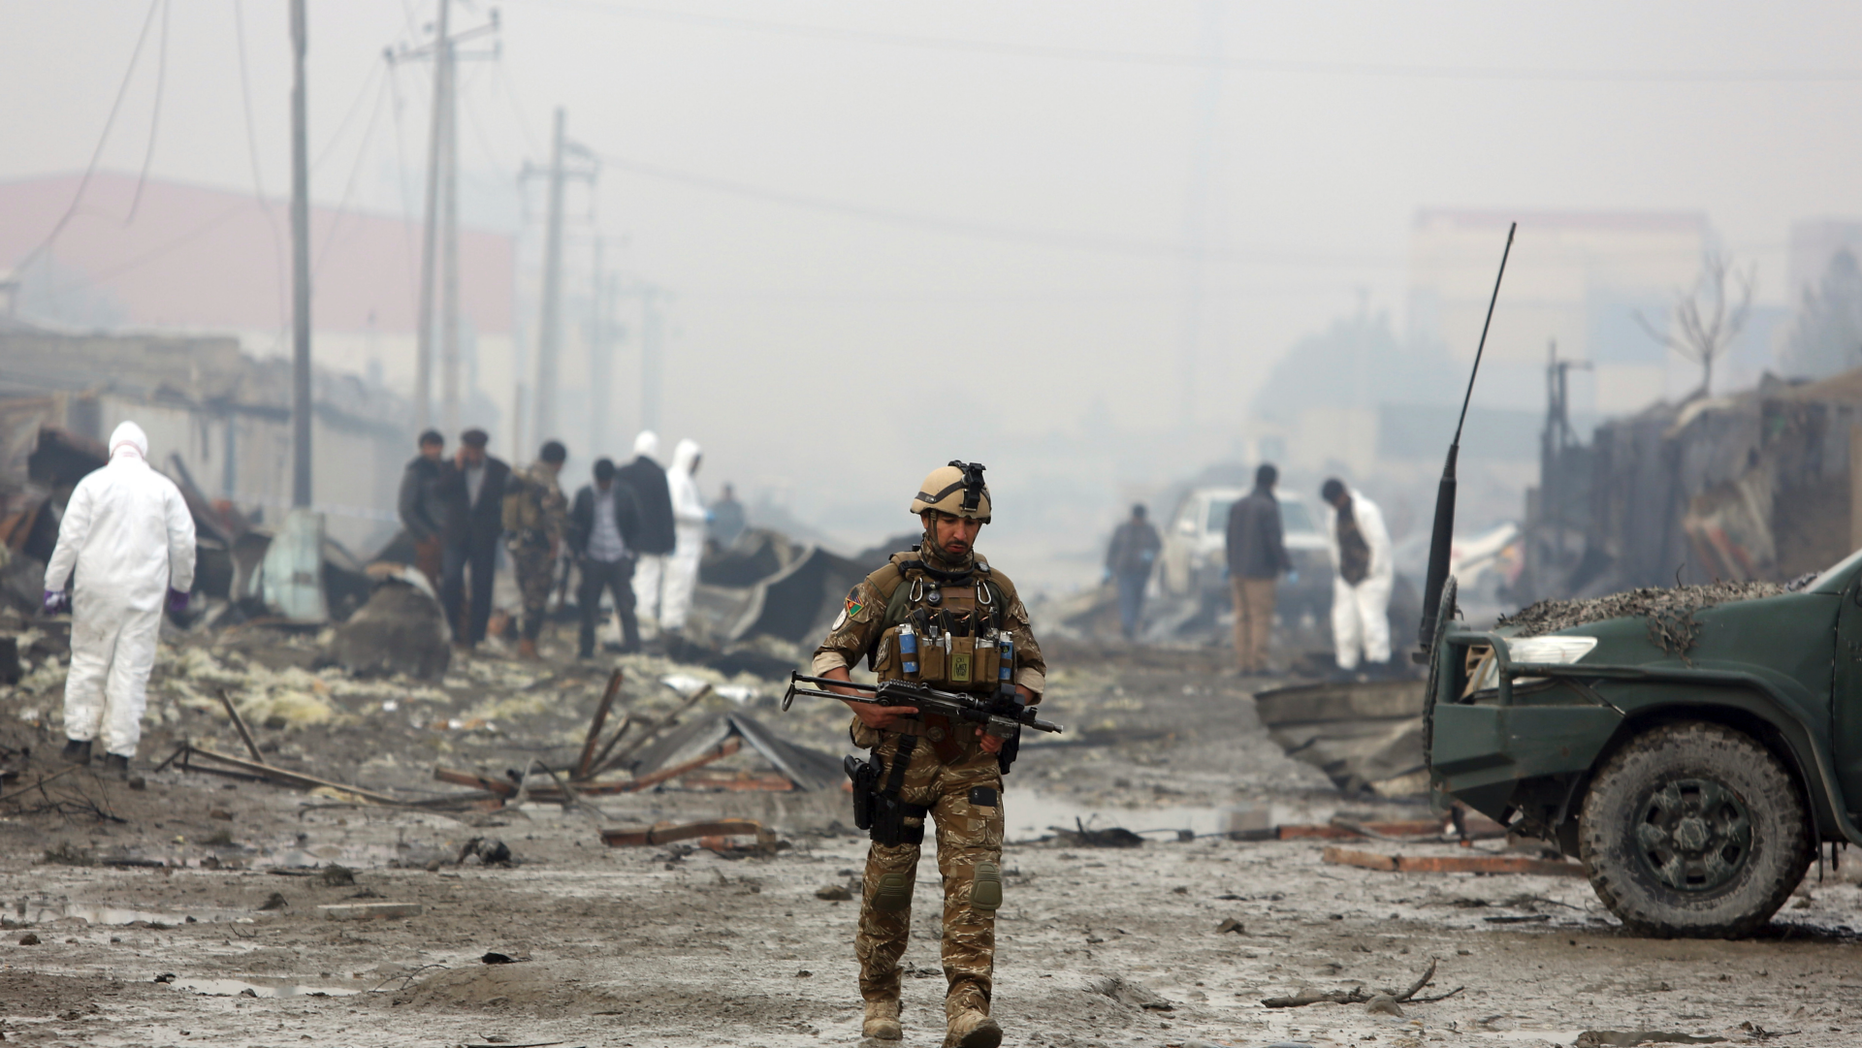 Afghanistan peace talks in doubt after Taliban